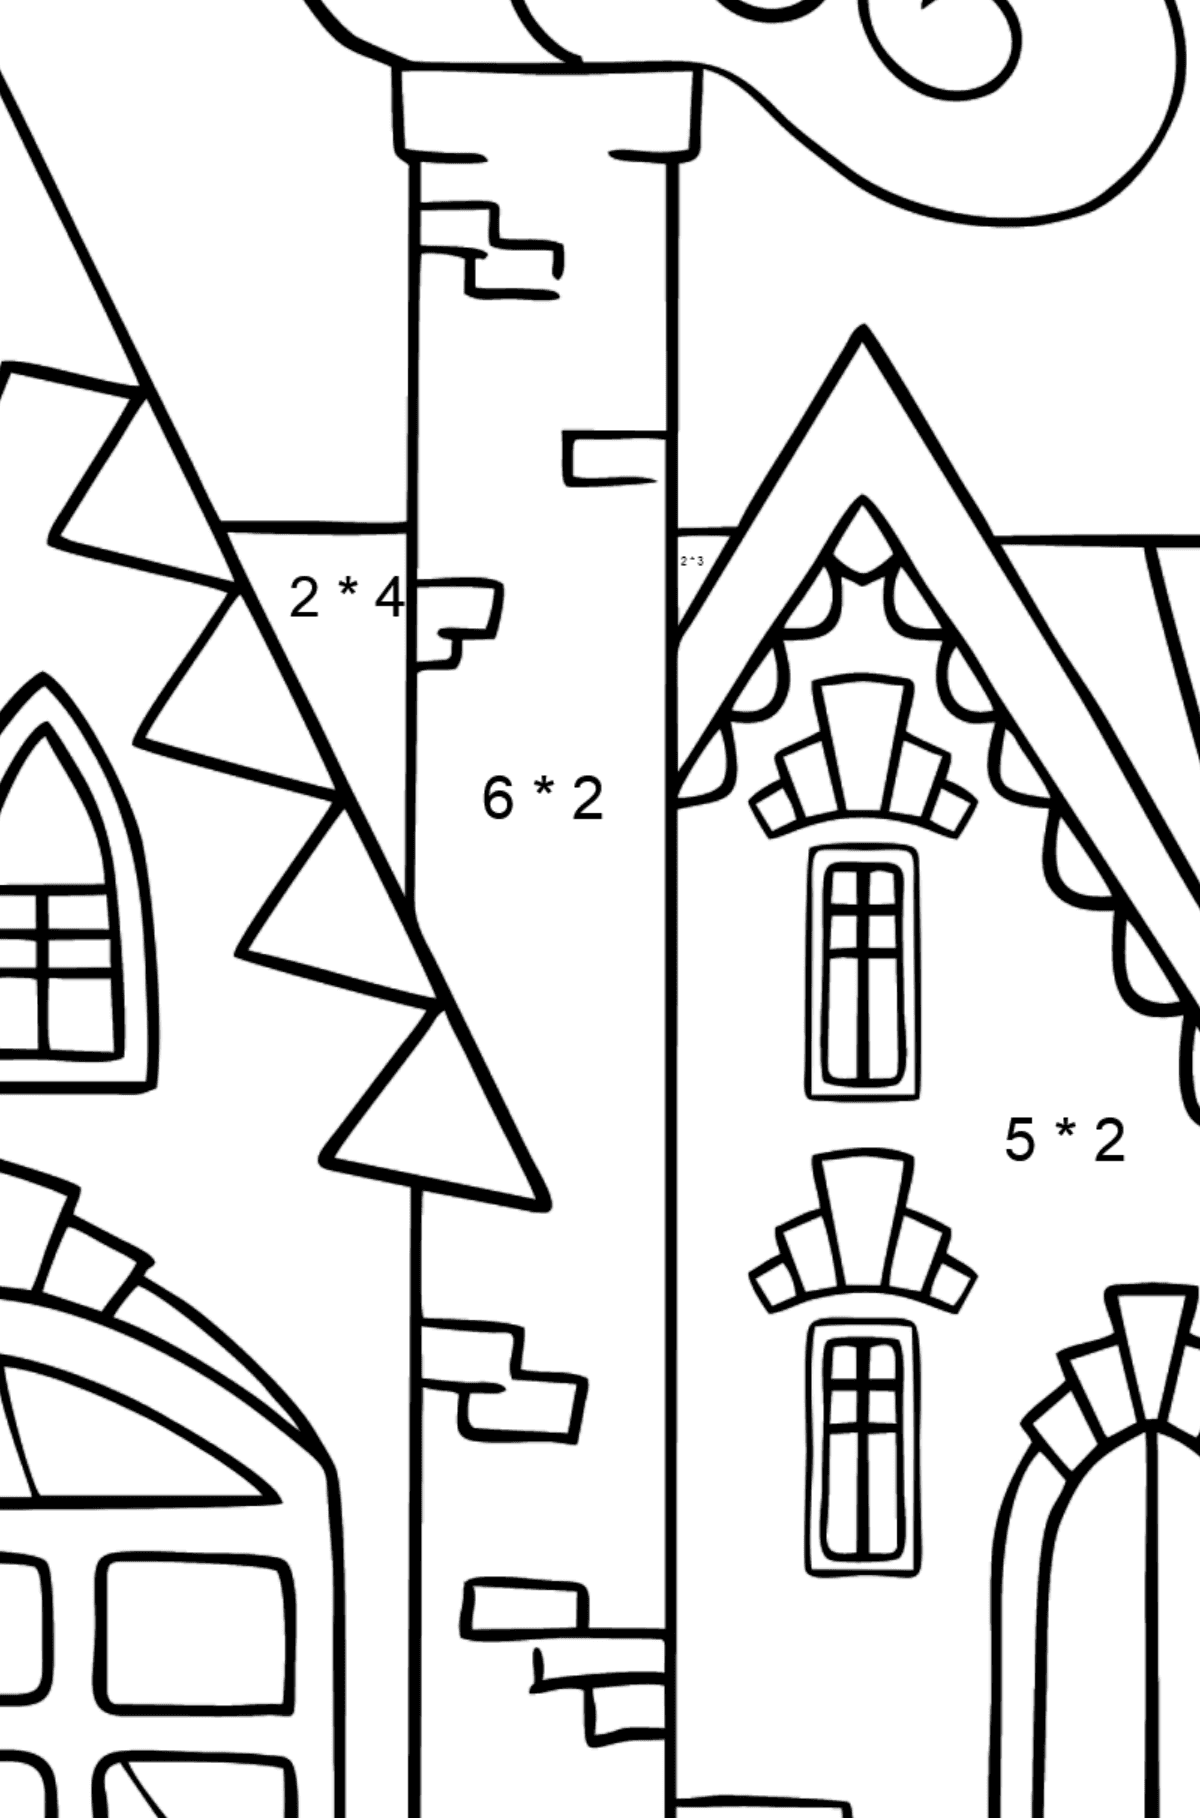 Simple Coloring Page - A Charming House - Math Coloring - Multiplication for Kids